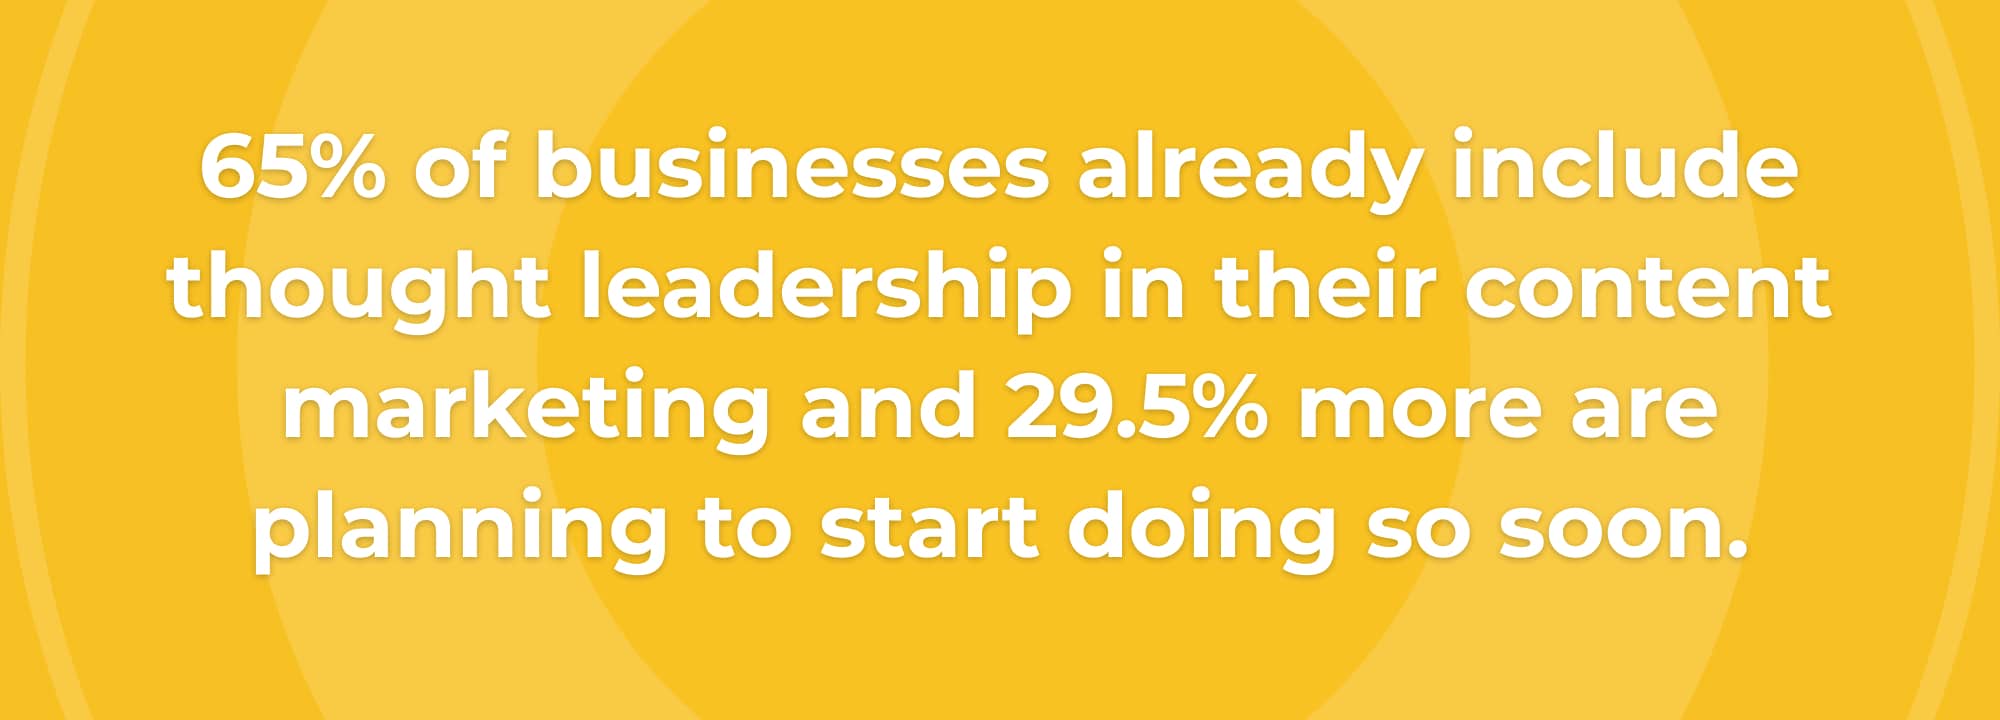 healthcare branding statistic: 65% of business include thought leadership in content marketing